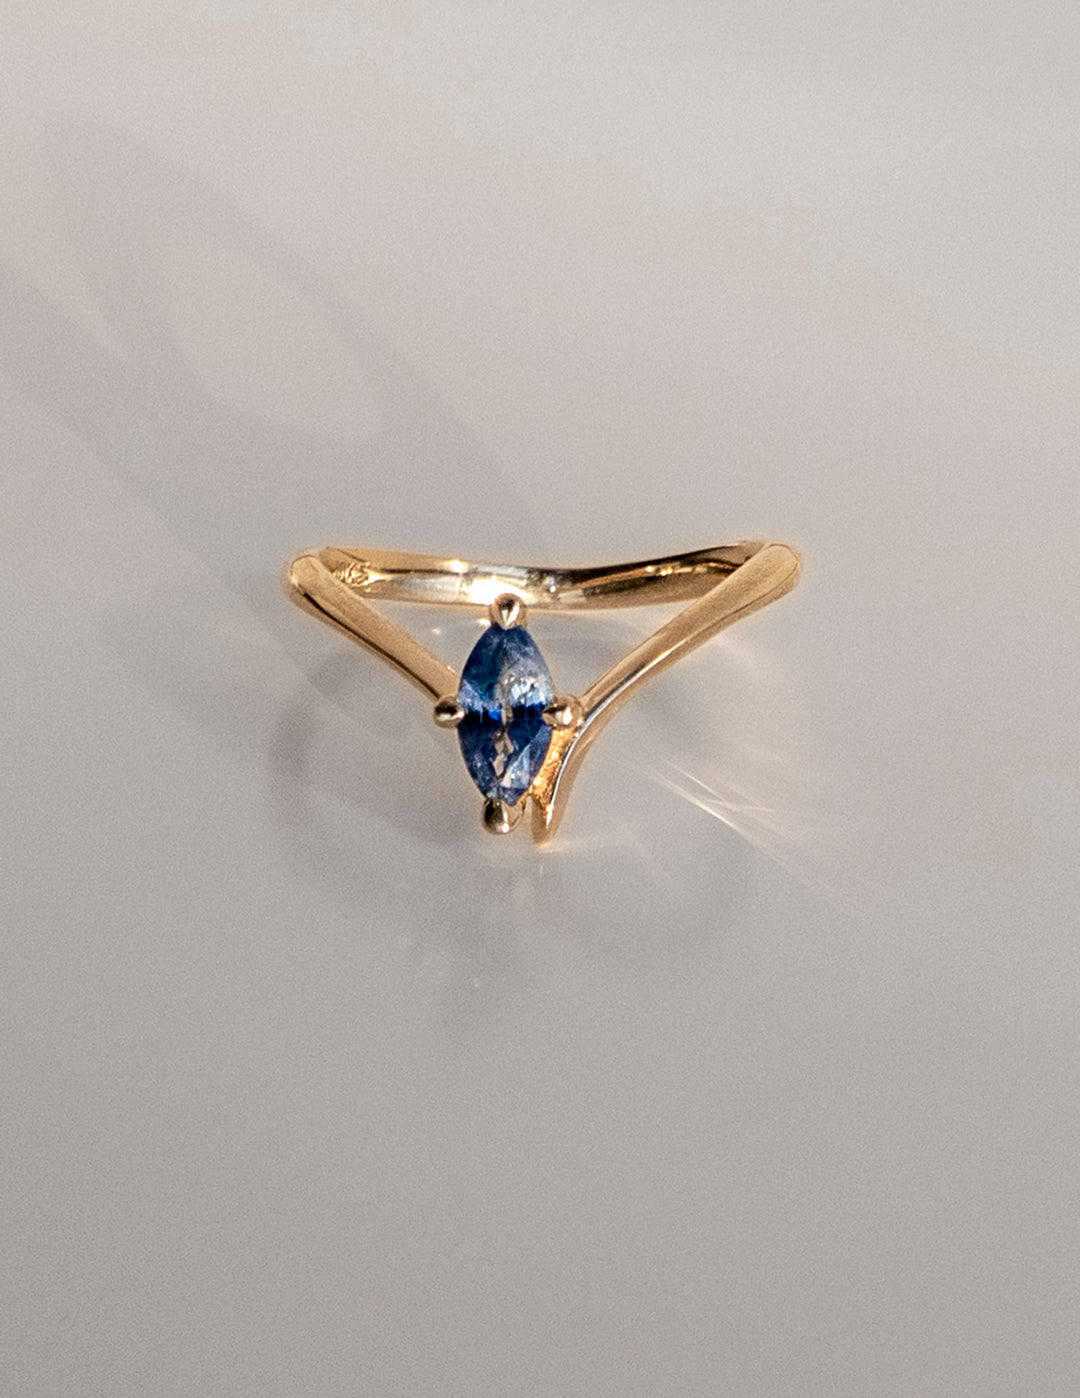 Twilight Hour (no.1) — One-of-a-kind Sapphire Ring